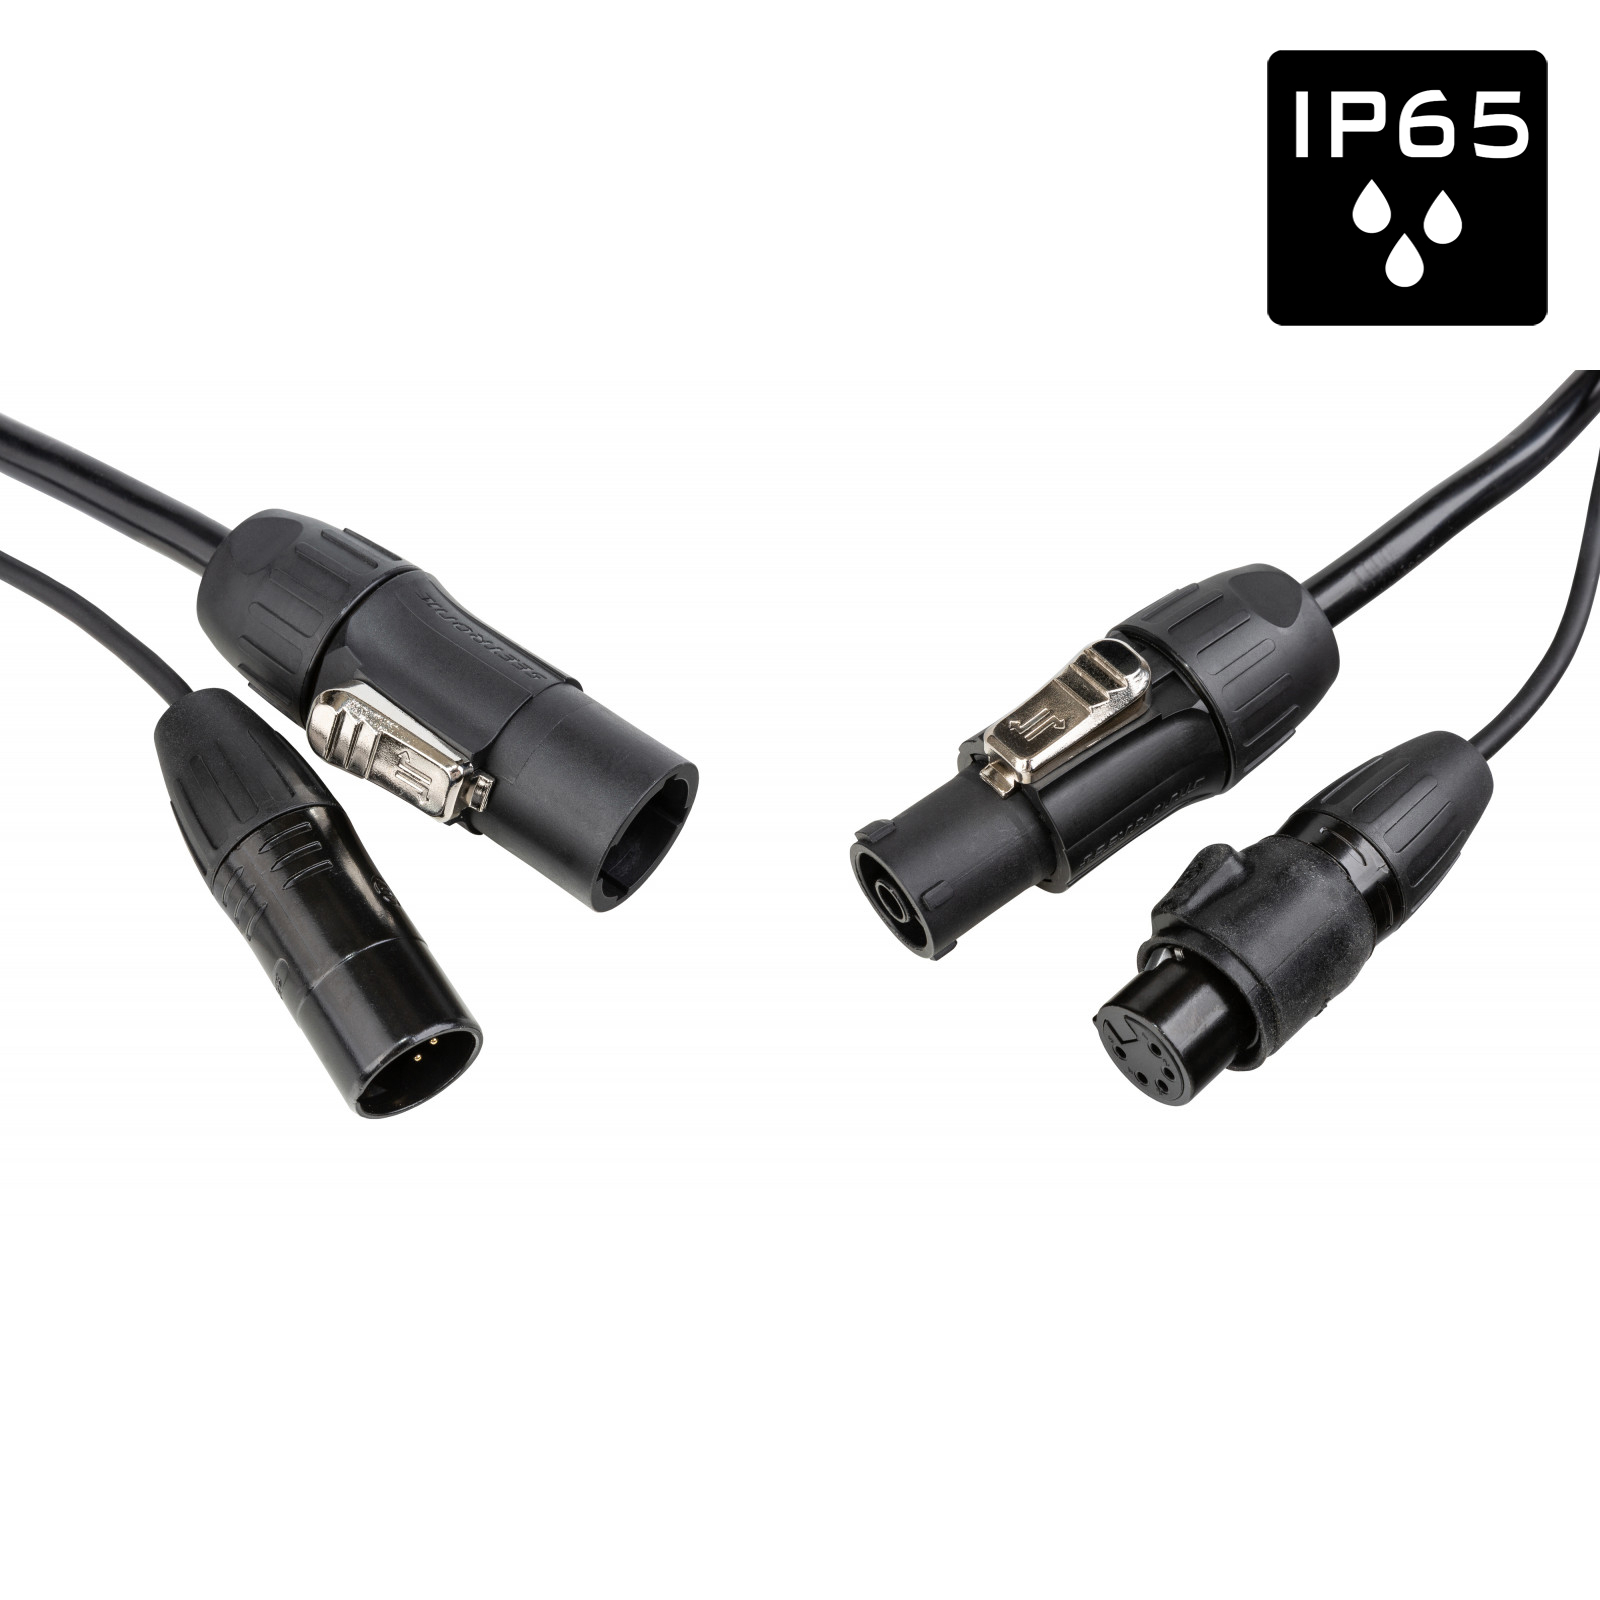 IP65 Outdoor combi cable with Seetronic XLR 5pin and True1 compatible connectors - Length 1.5m